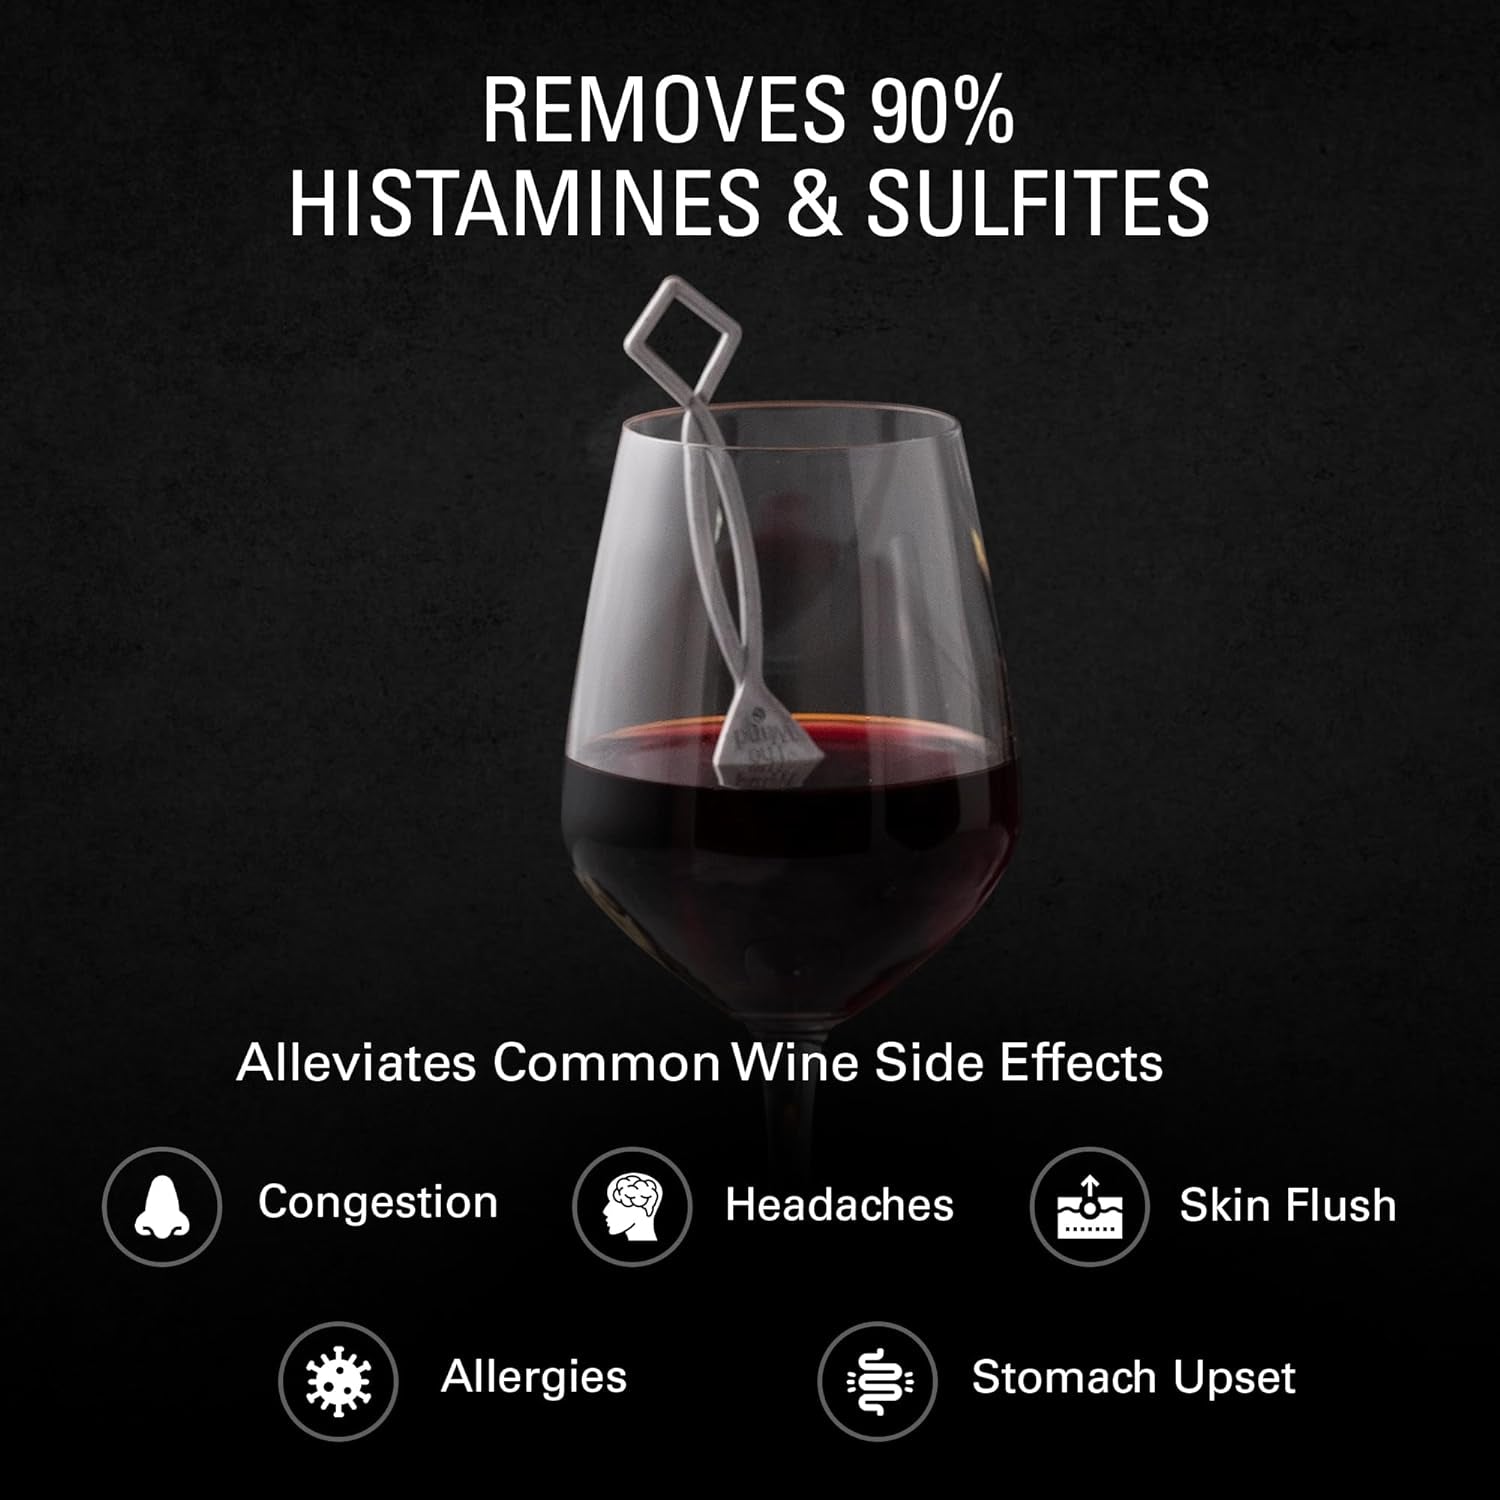 Wine Bliss Unleashed: Pure wine Silver & Gold Wand – Filters Histamines and Sulfites, Elevates Taste, and Aids Allergies!